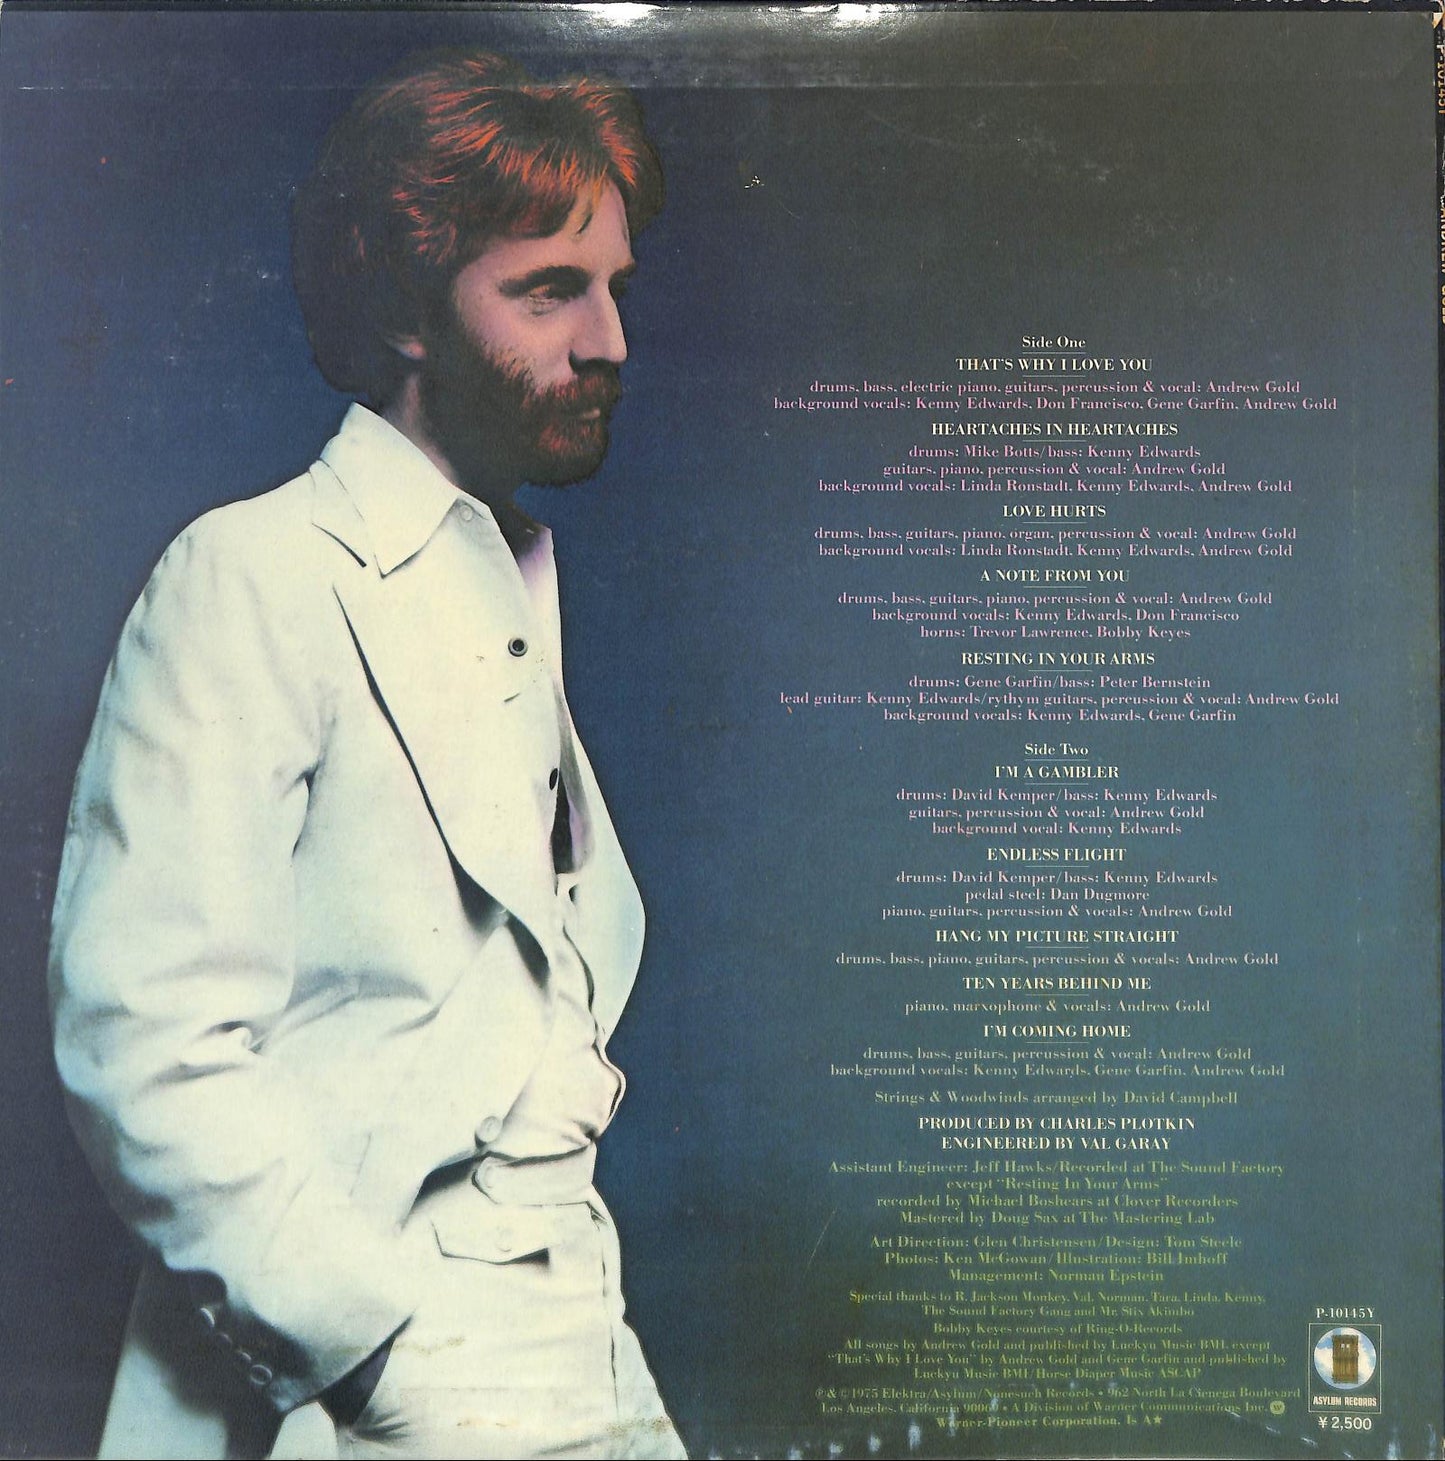 ANDREW GOLD - Andrew Gold